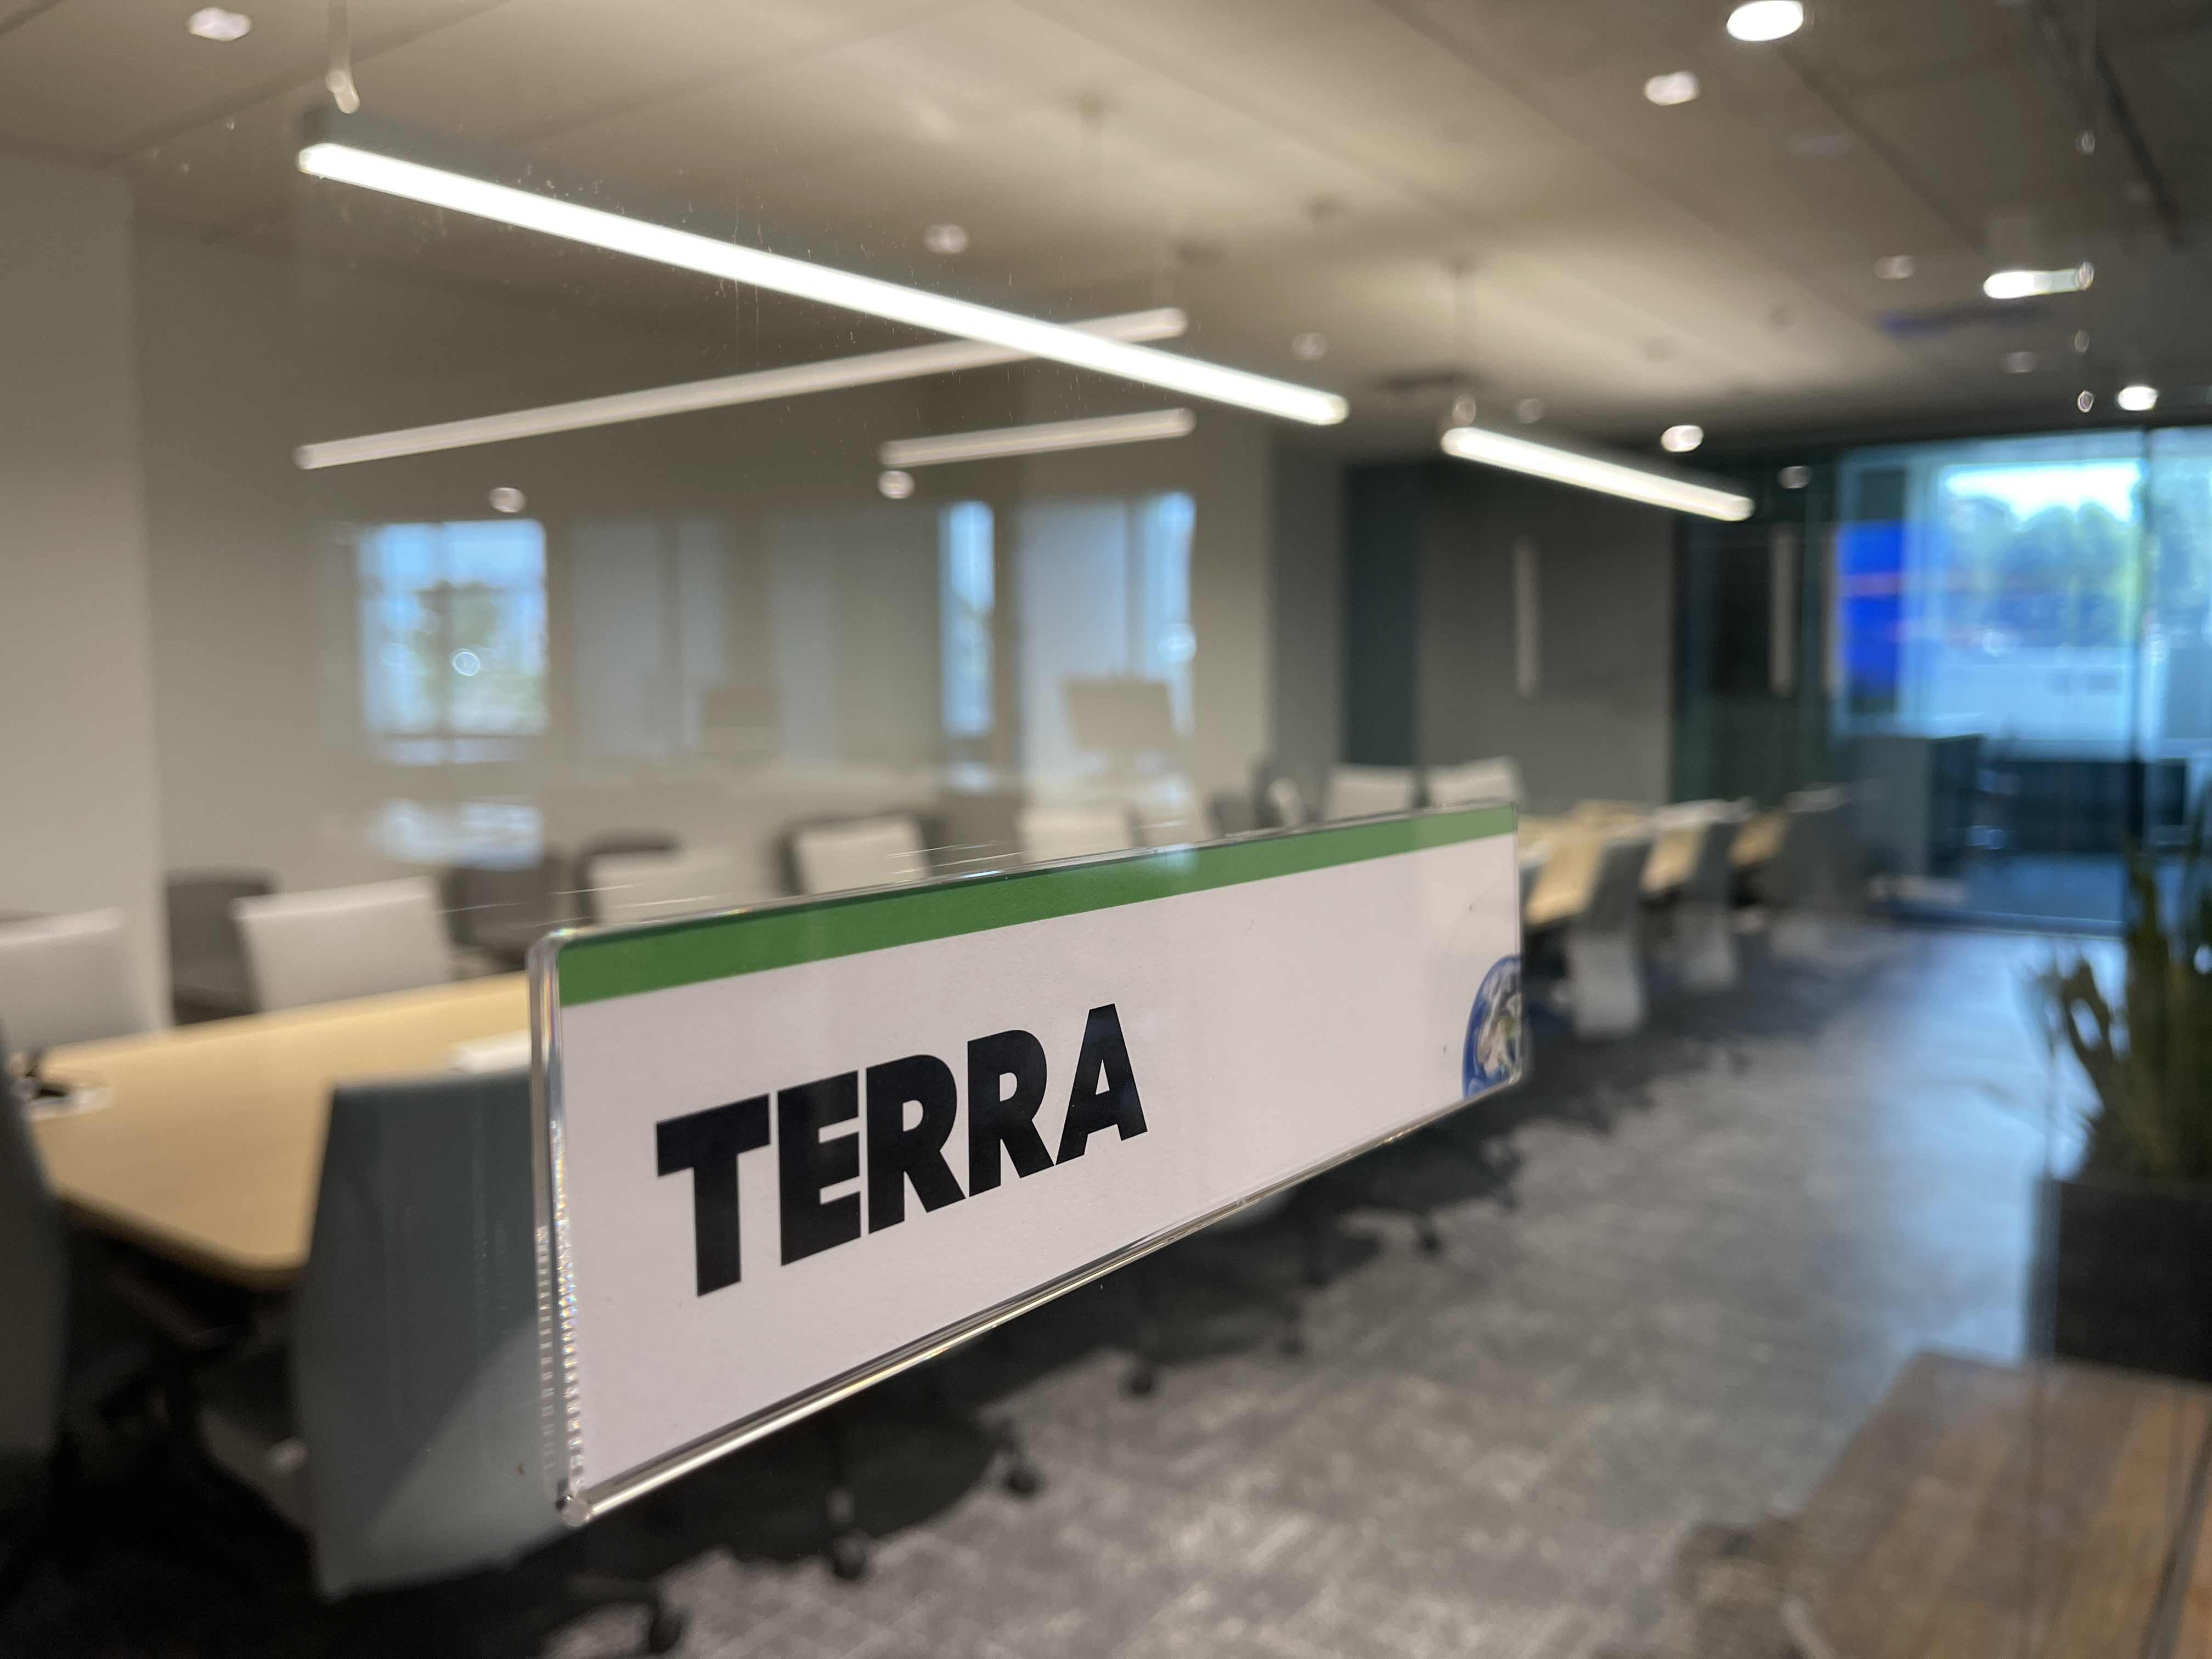 The Terra conference room is the center of our office universe and where Velocity Global gathers for all-hands meetings.